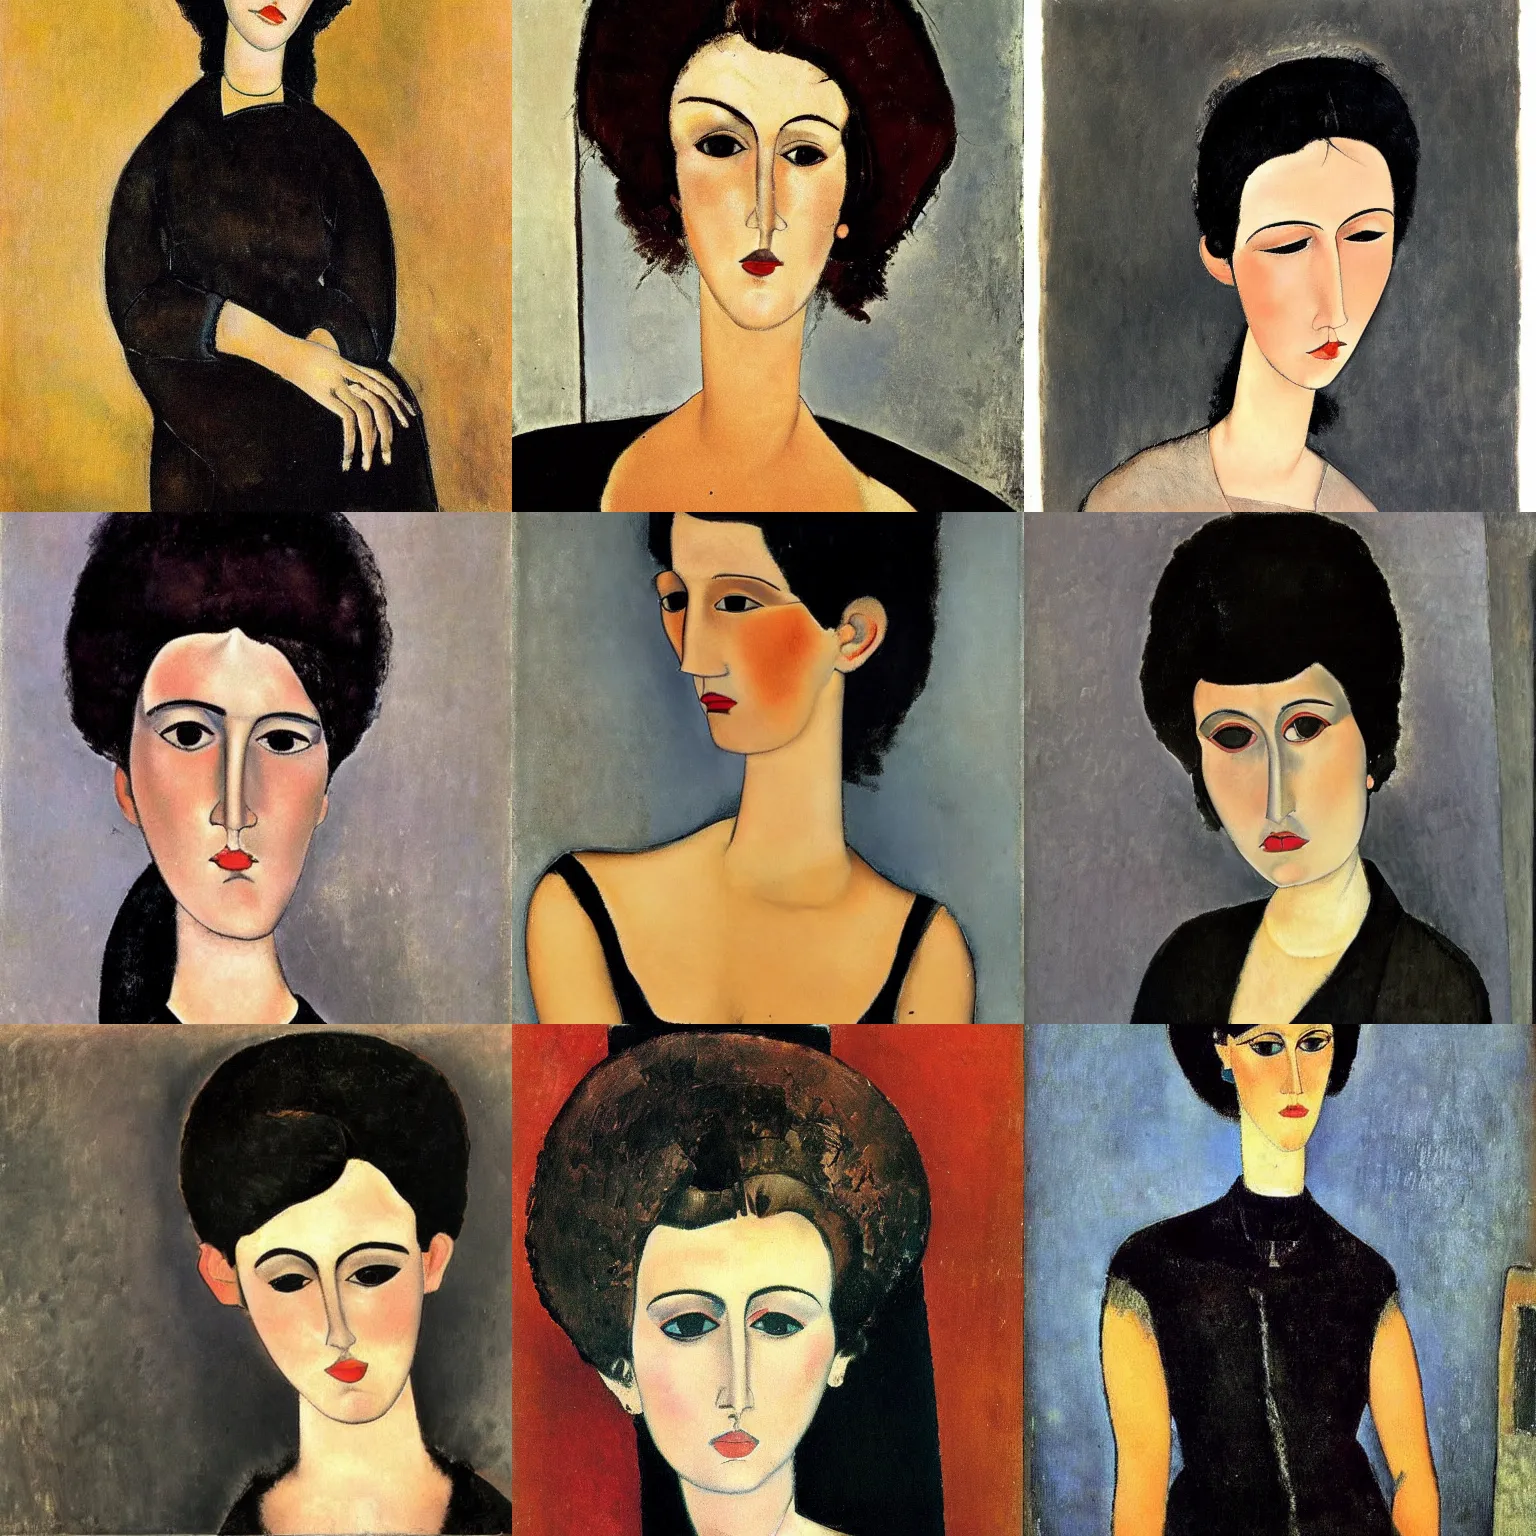 Prompt: A goth portrait painted by Amedeo Modigliani. Her hair is naturally dark brown and cut into a short, messy pixie cut. She has a slightly rounded face, with a pointed chin, large entirely-black eyes, and a small nose. She is wearing a black tank top, a black leather jacket, a black knee-length skirt, a black choker, and black leather boots.